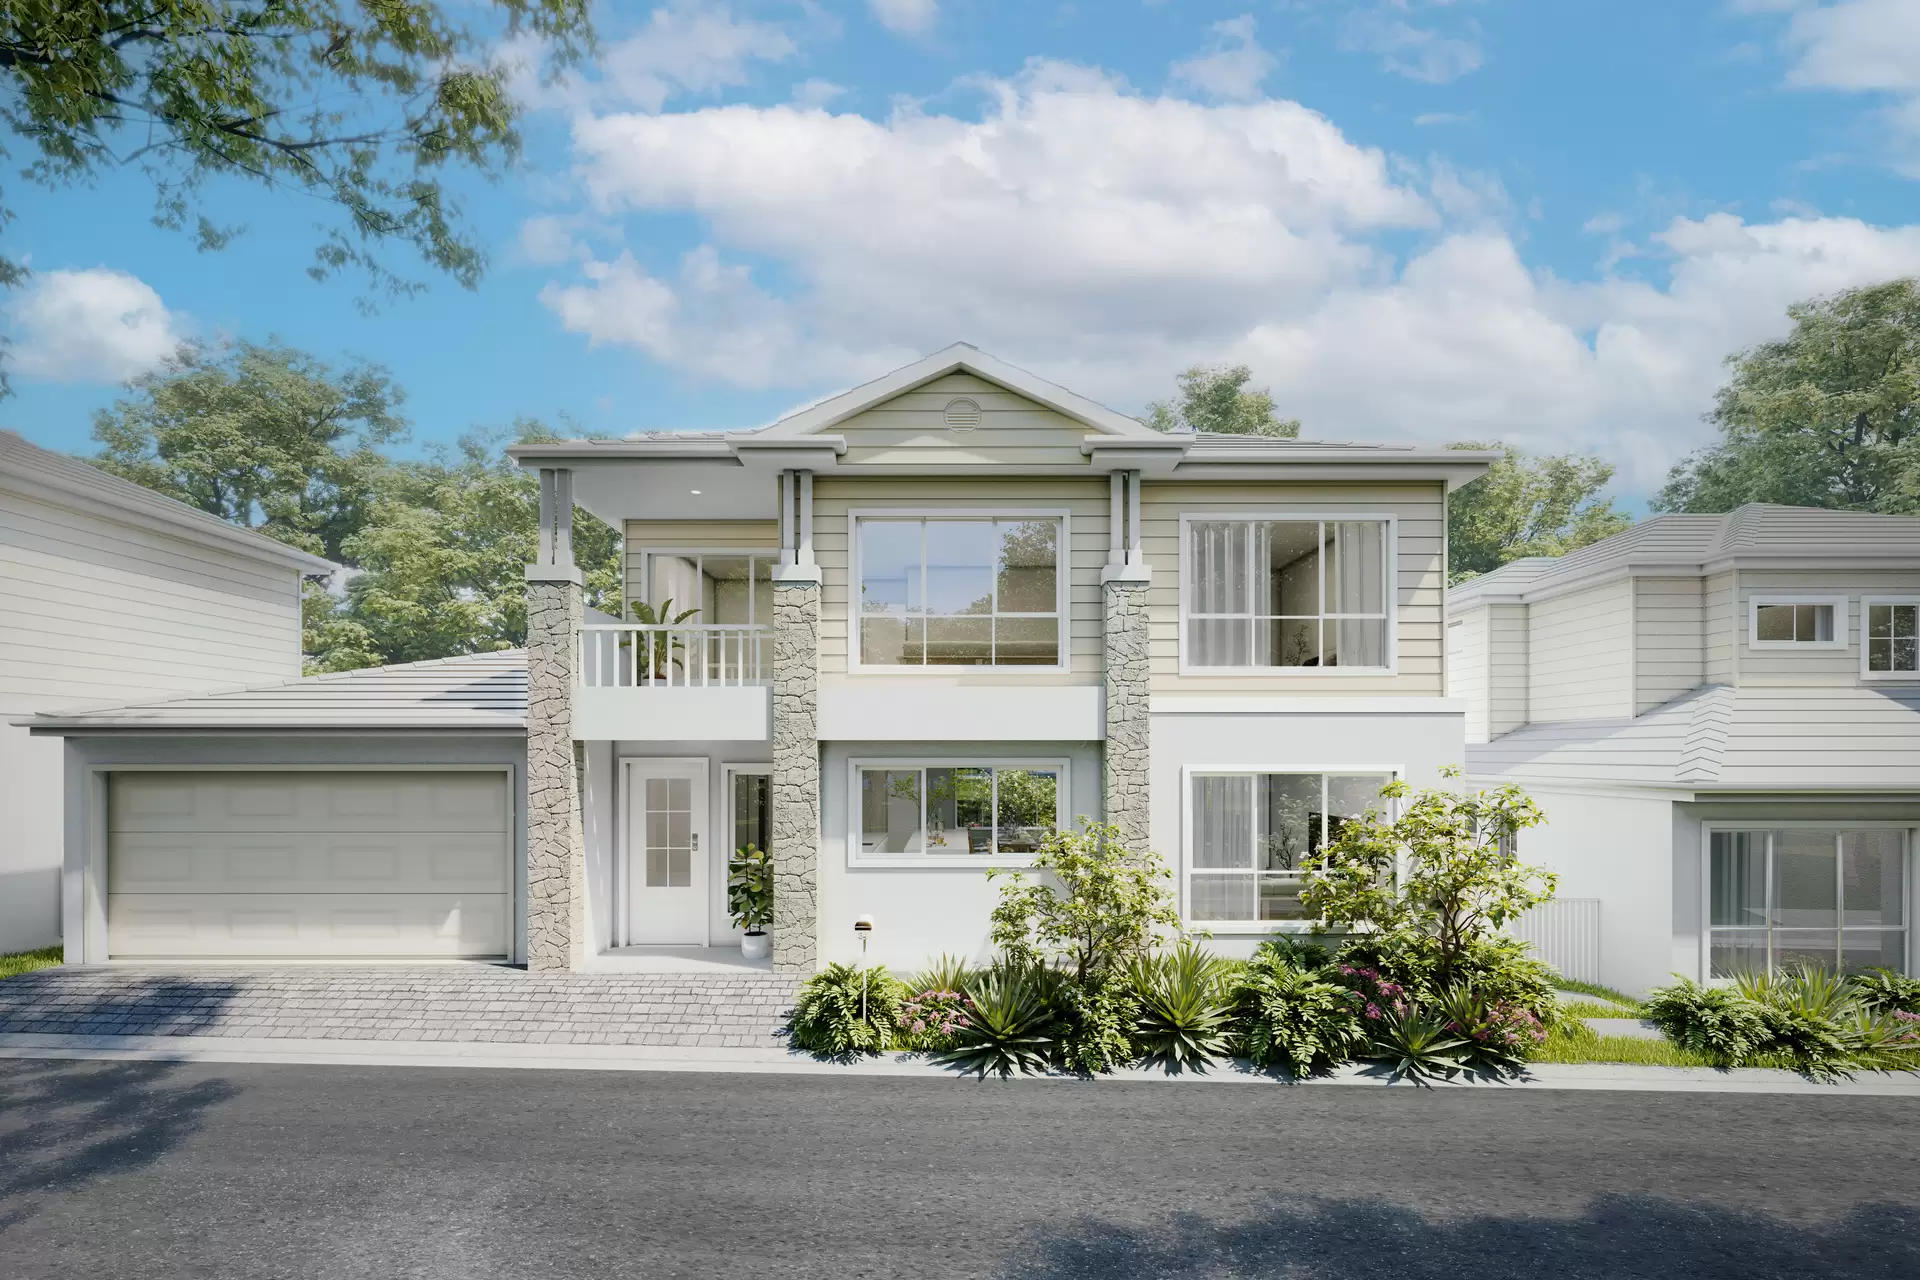 Photo #5: 1 View Street, West Pennant Hills - For Sale by Louis Carr Real Estate